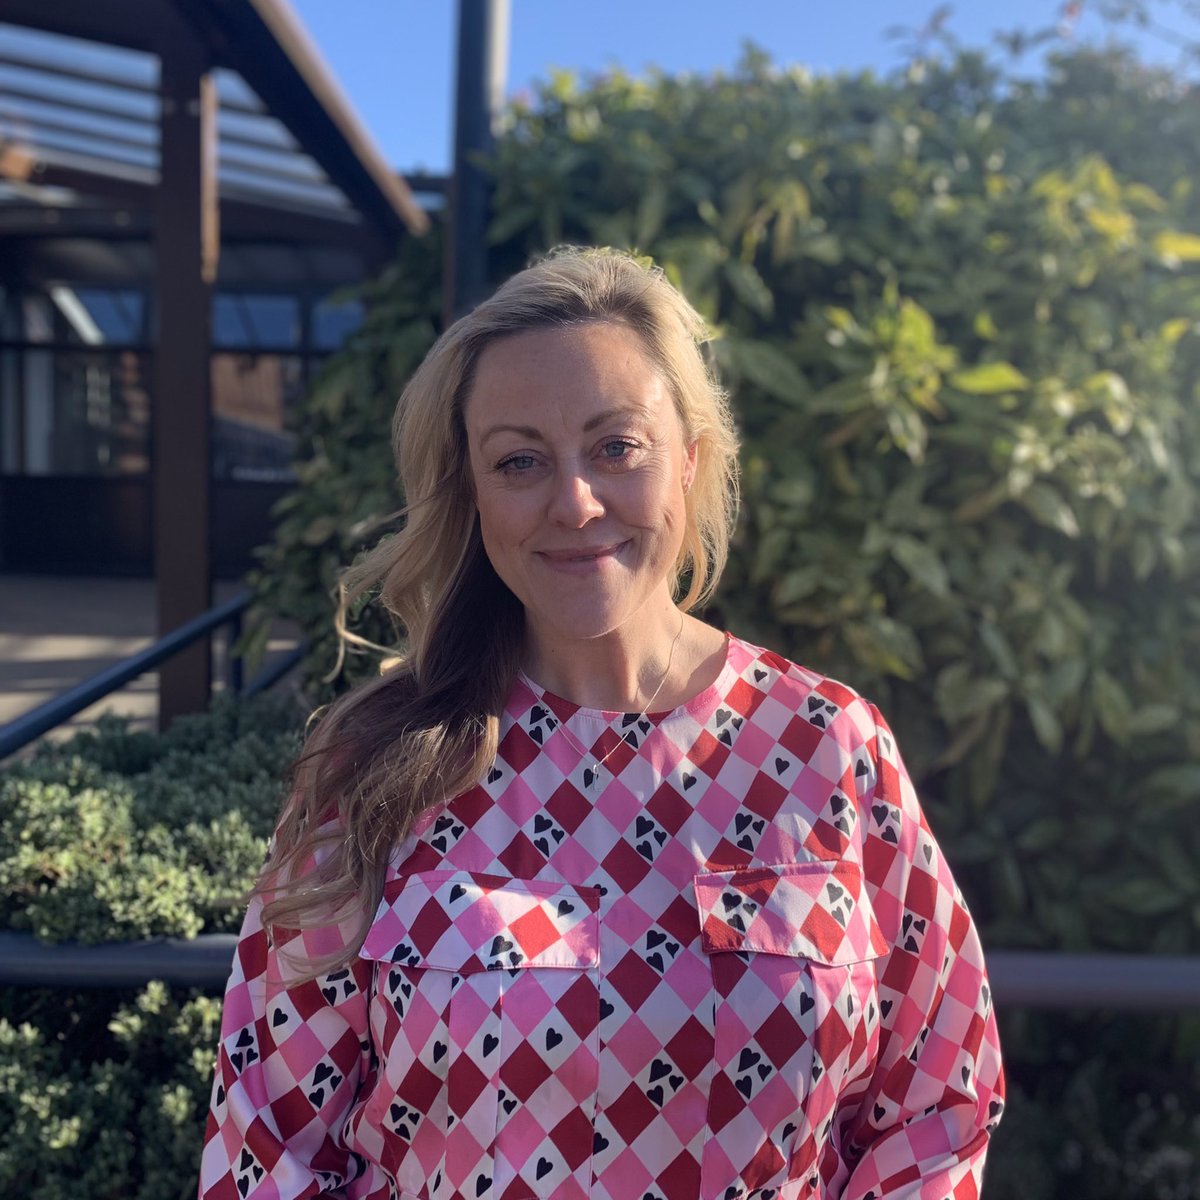 Welcome to Lesley White who joins us as our Recruitment Manager, you can contact Lesley to discuss any advertised roles or simply to chat about career opportunities recruitment@danesedtrust.org.uk https://t.co/lOazcNhzFH